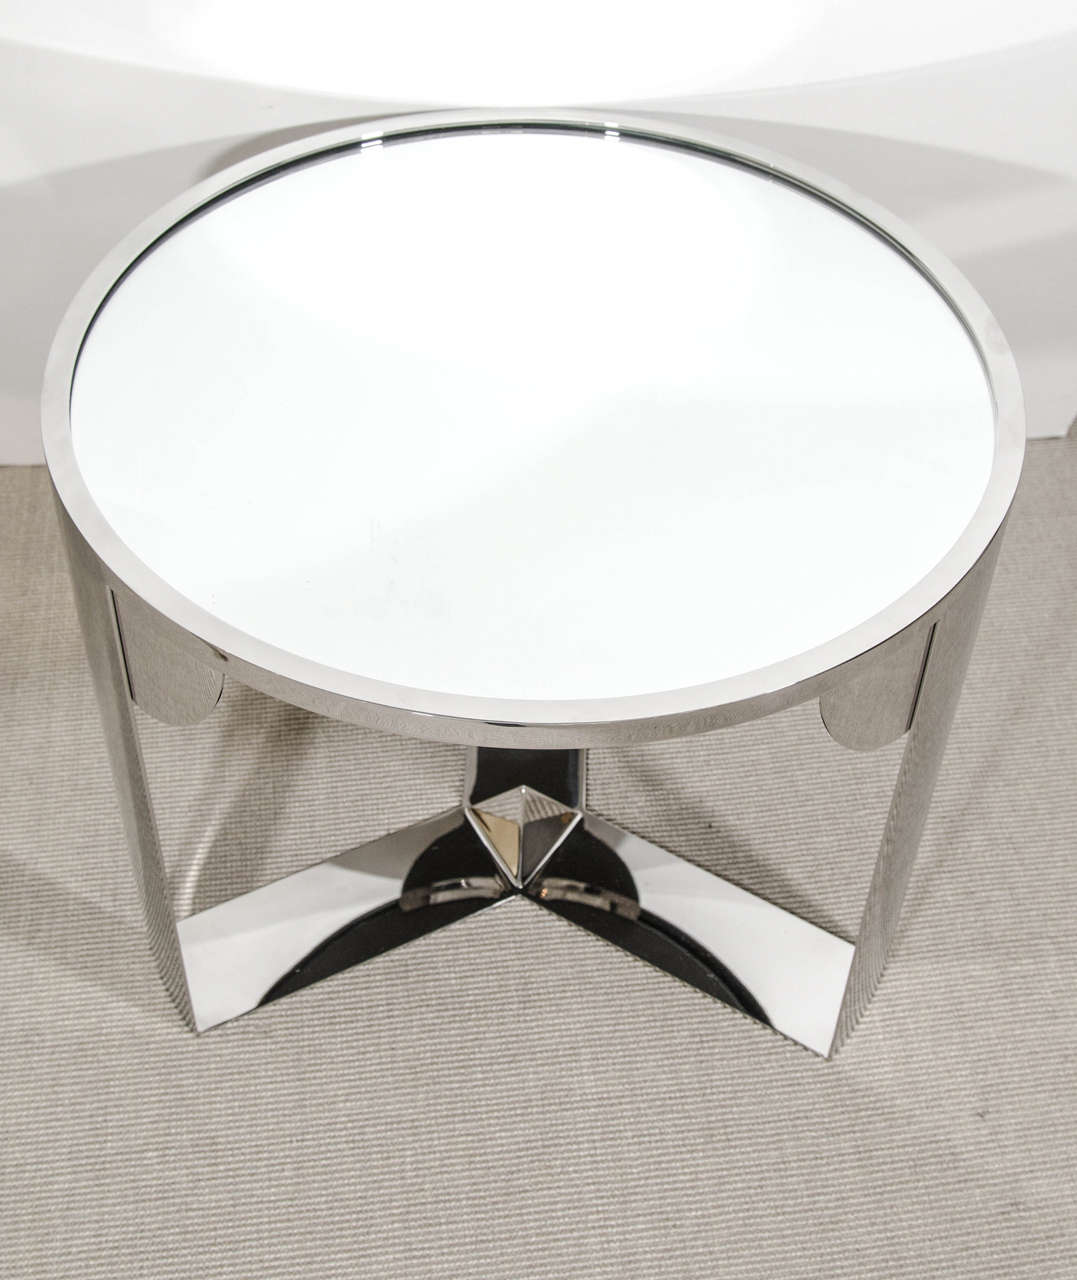 Limited Edition Constructivist Inspired Custom-Made Table by Eric Appel, USA For Sale 2